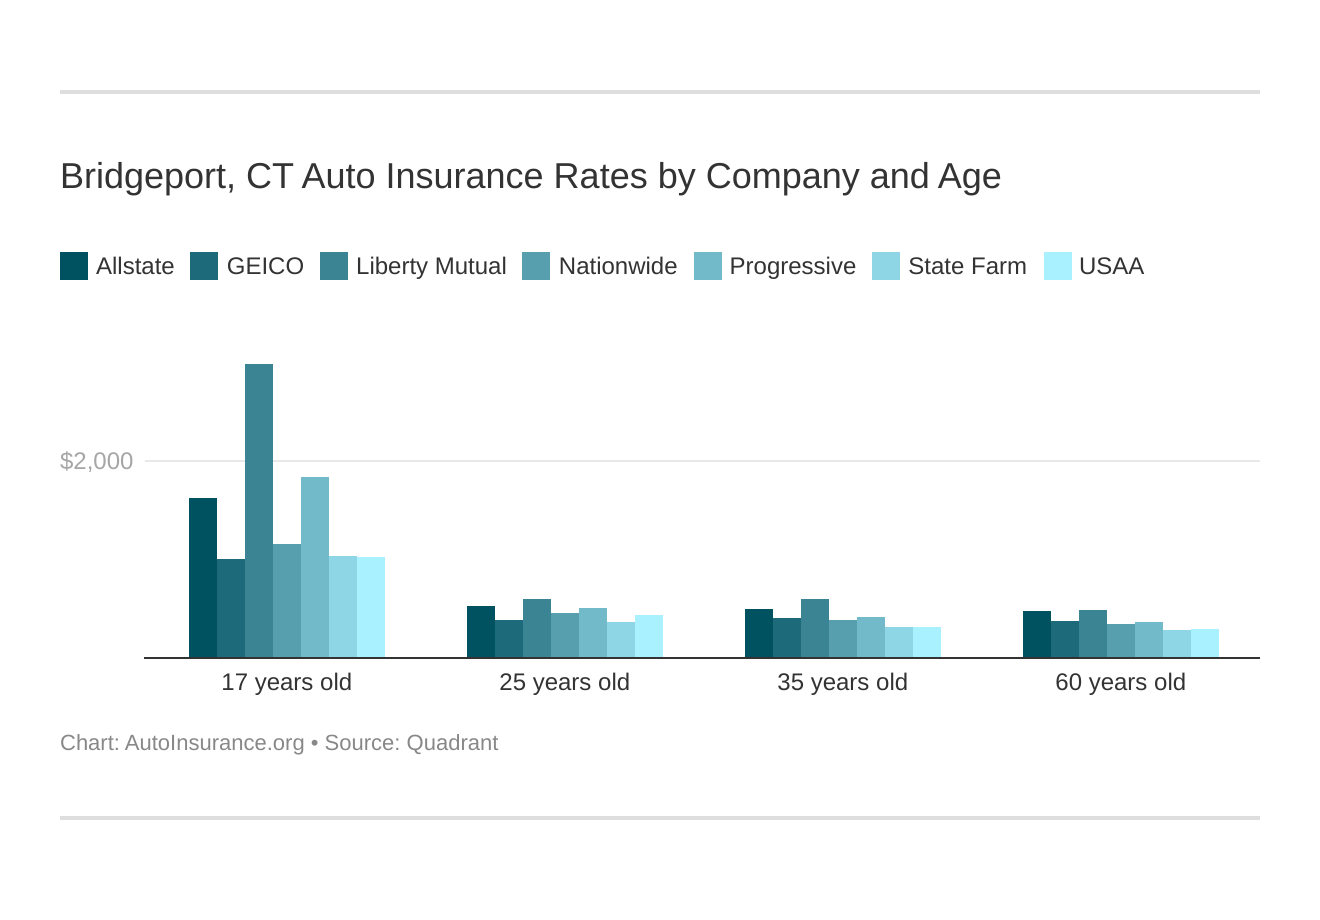 Bridgeport, CT Auto Insurance Rates by Company and Age